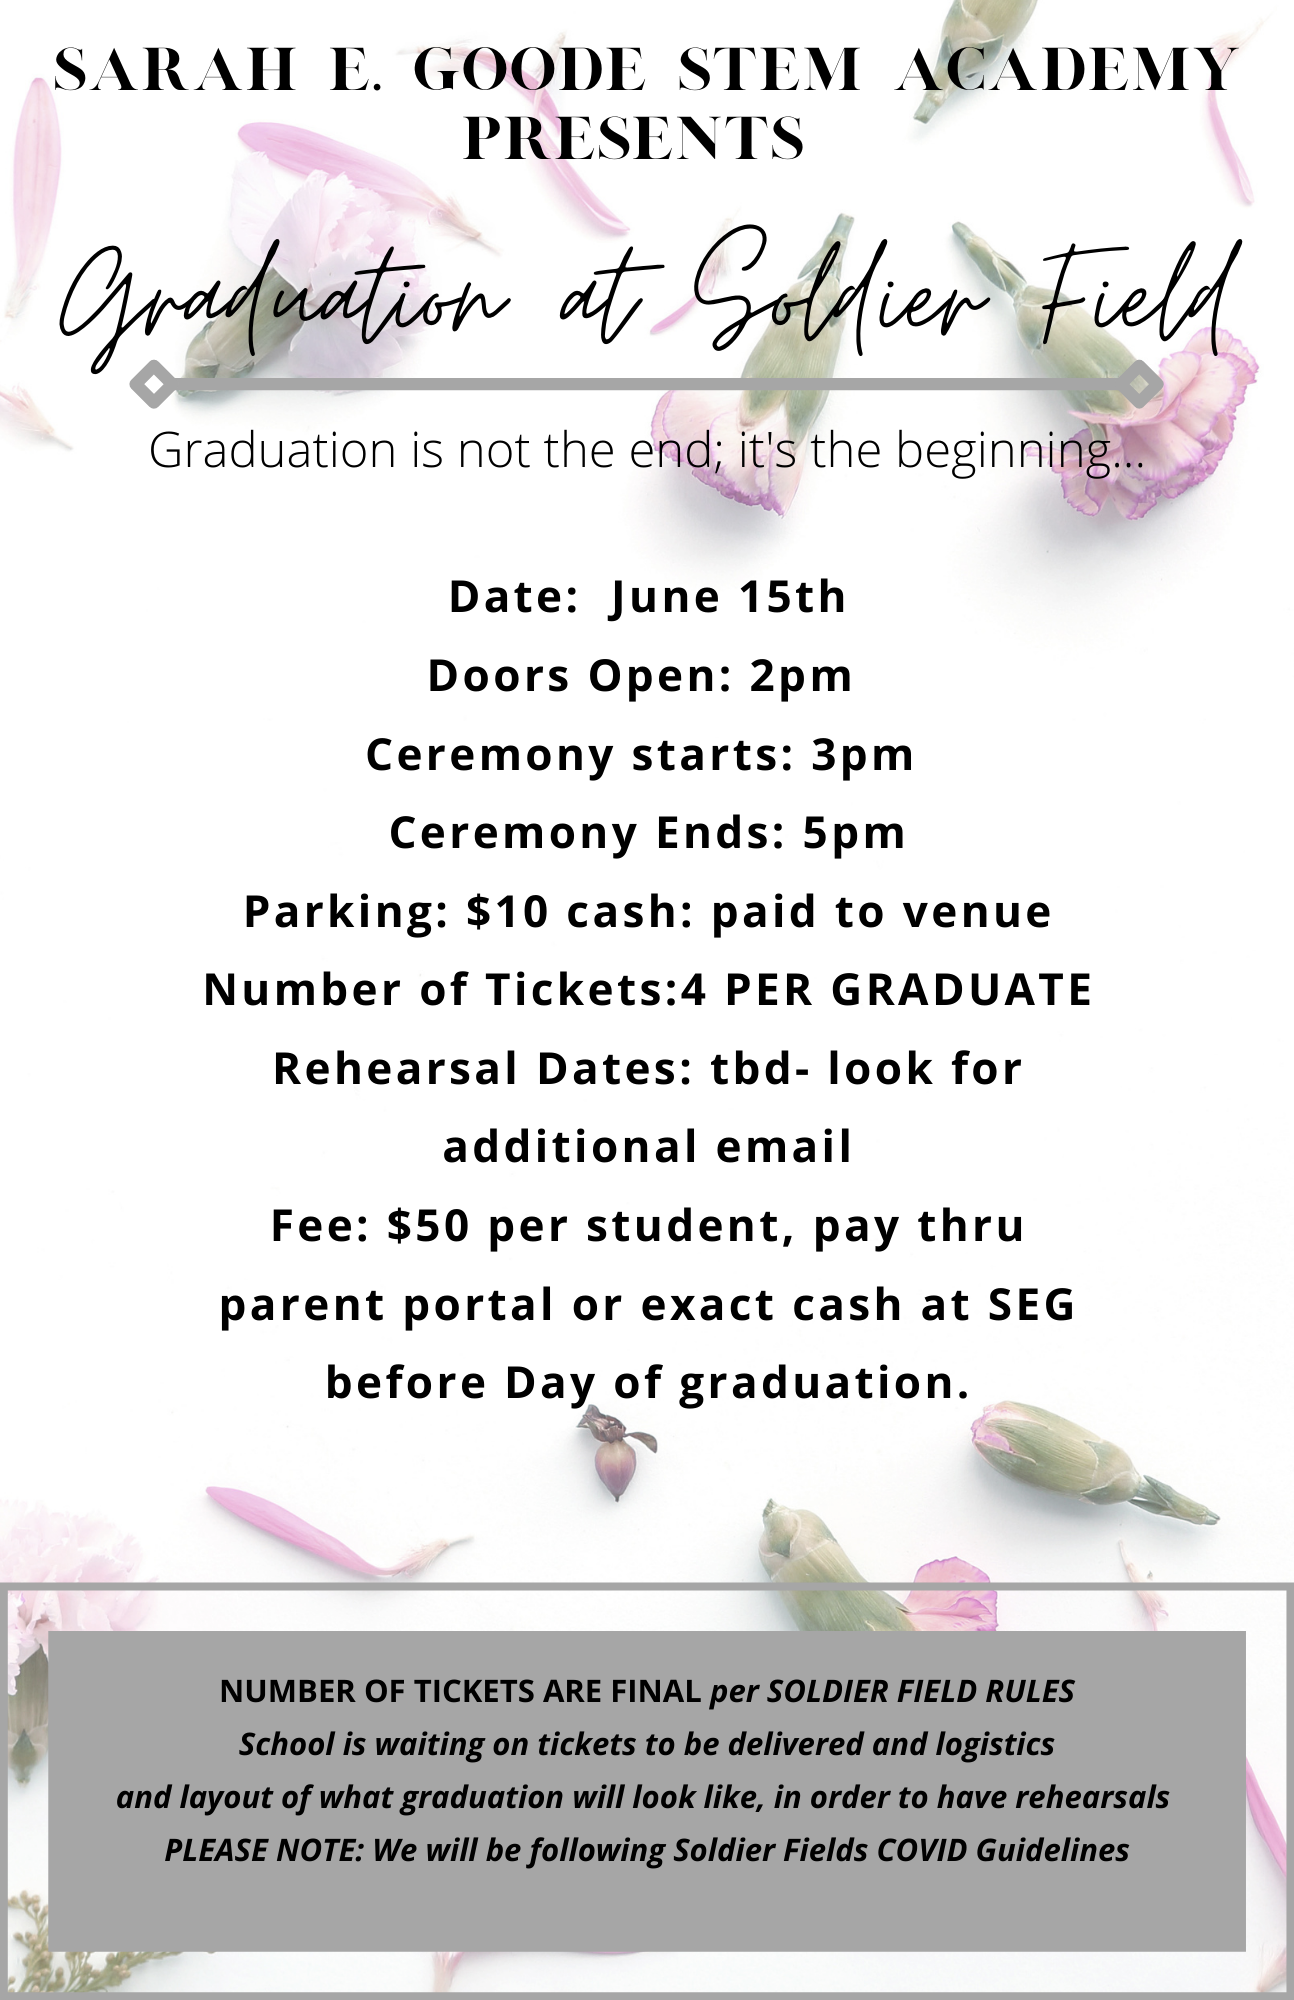 Graduation at Soldier Field June 15th, 2021